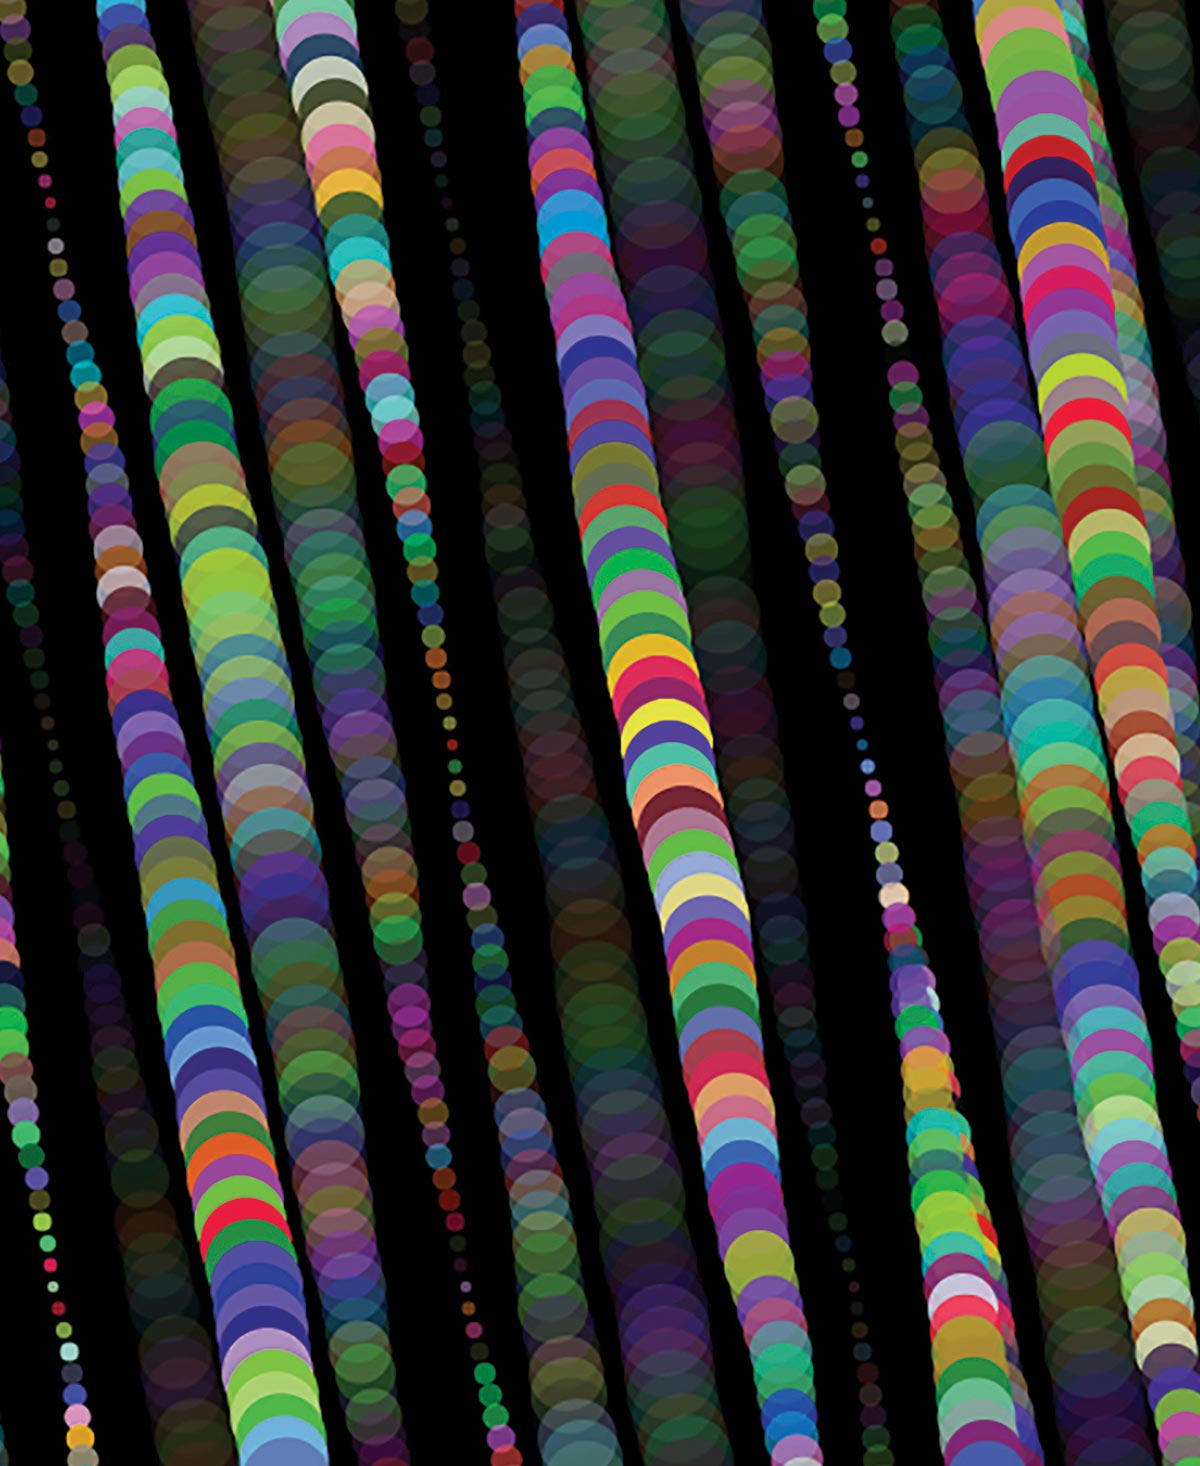 Lines made of colorful, overlapping dots of varying sizes on a black background. Some are in sharper focus than others.